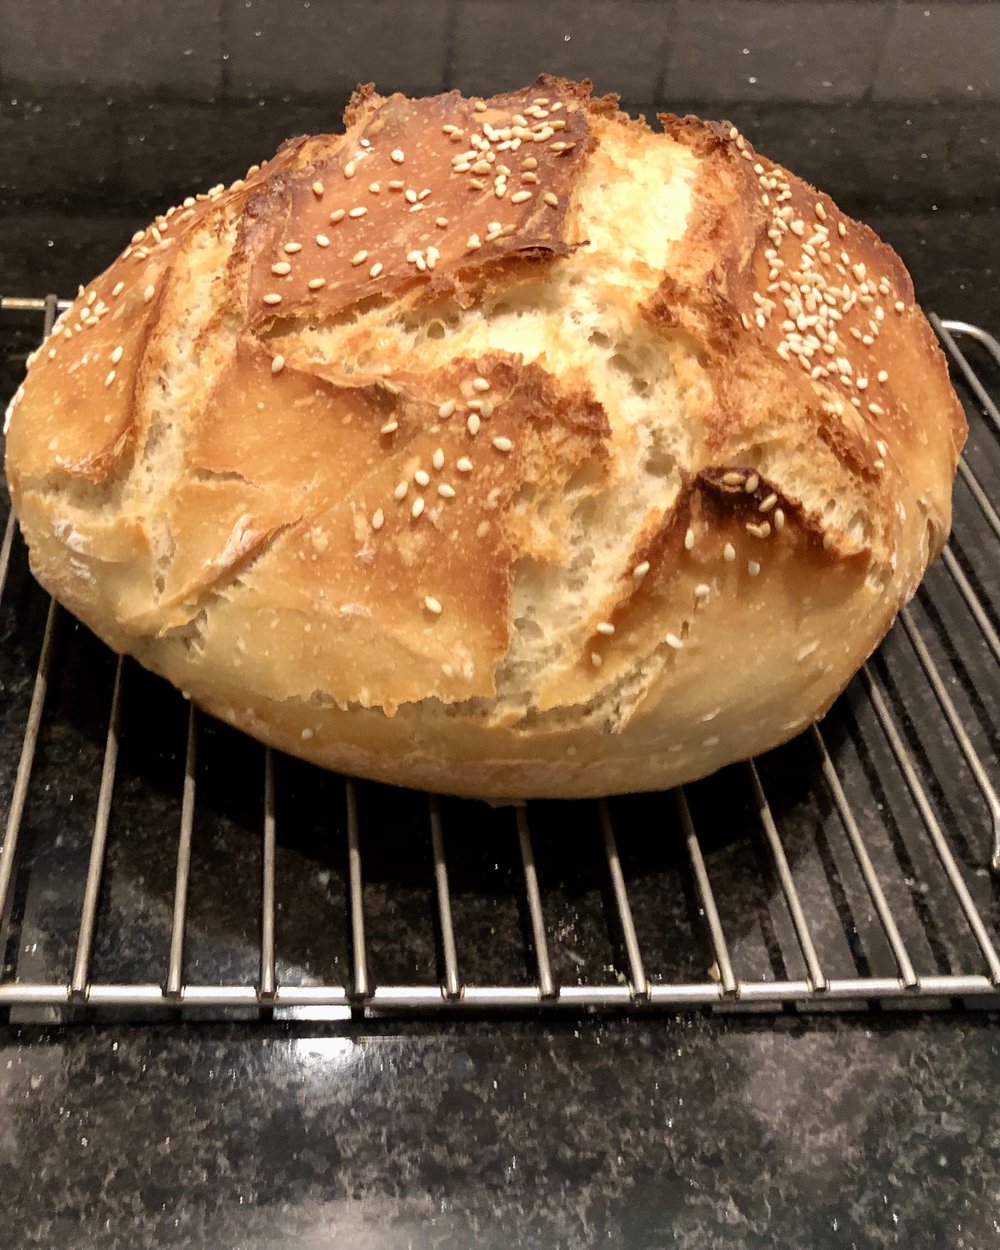 My breadmaking skills continue to improve. I made a loaf on Saturday and sent it to my daughter K...